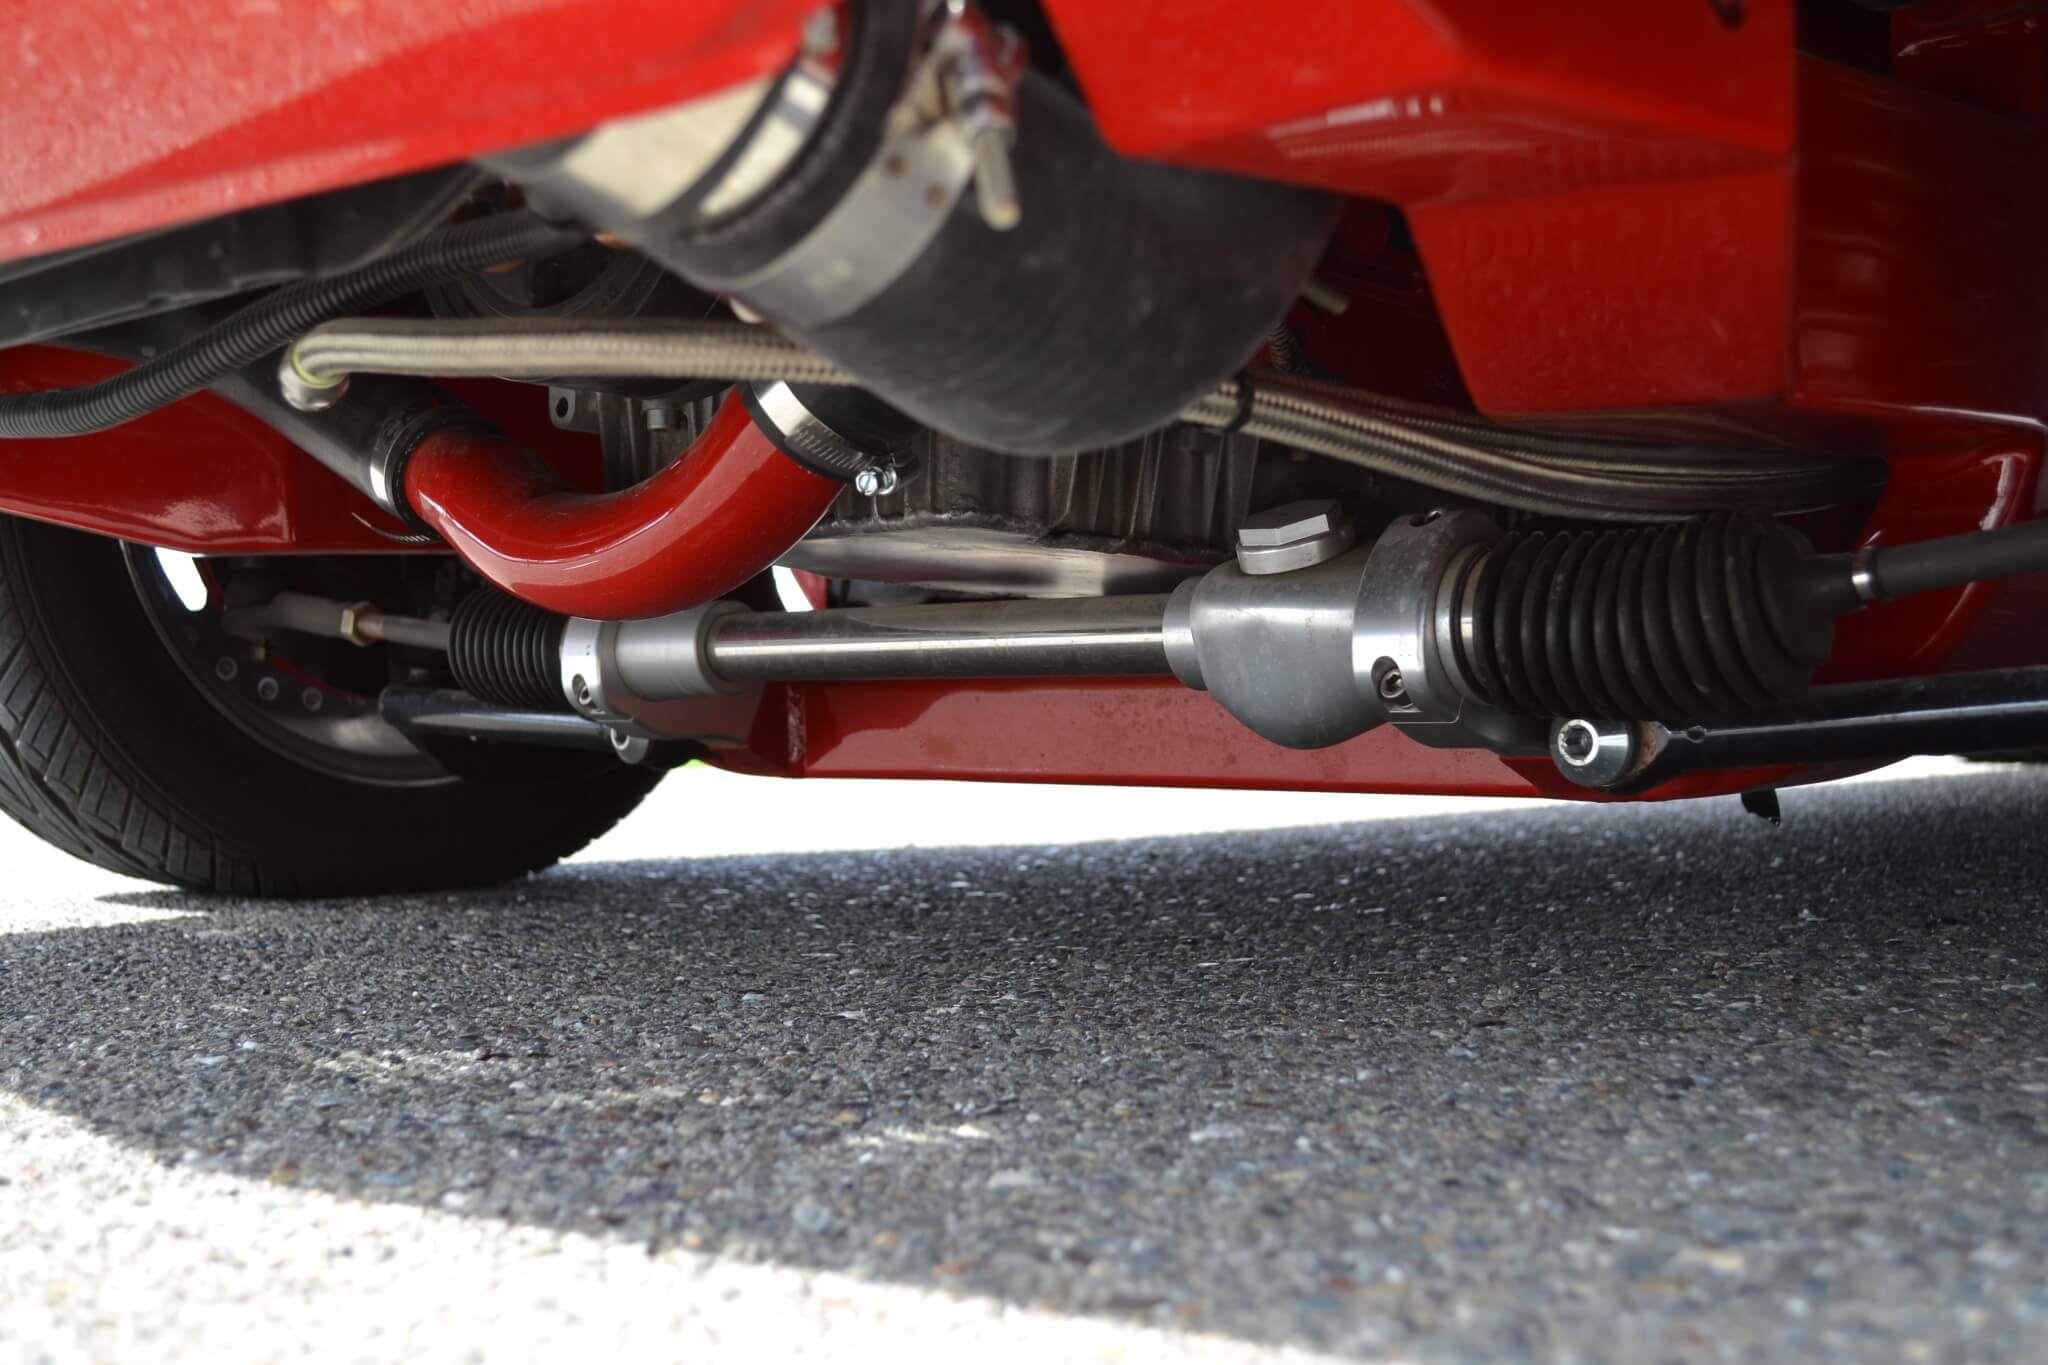 The front suspension of the Camaro is a bolt-on G-Force front clip that was installed by Hamm, and tied in to the rear frame rails.